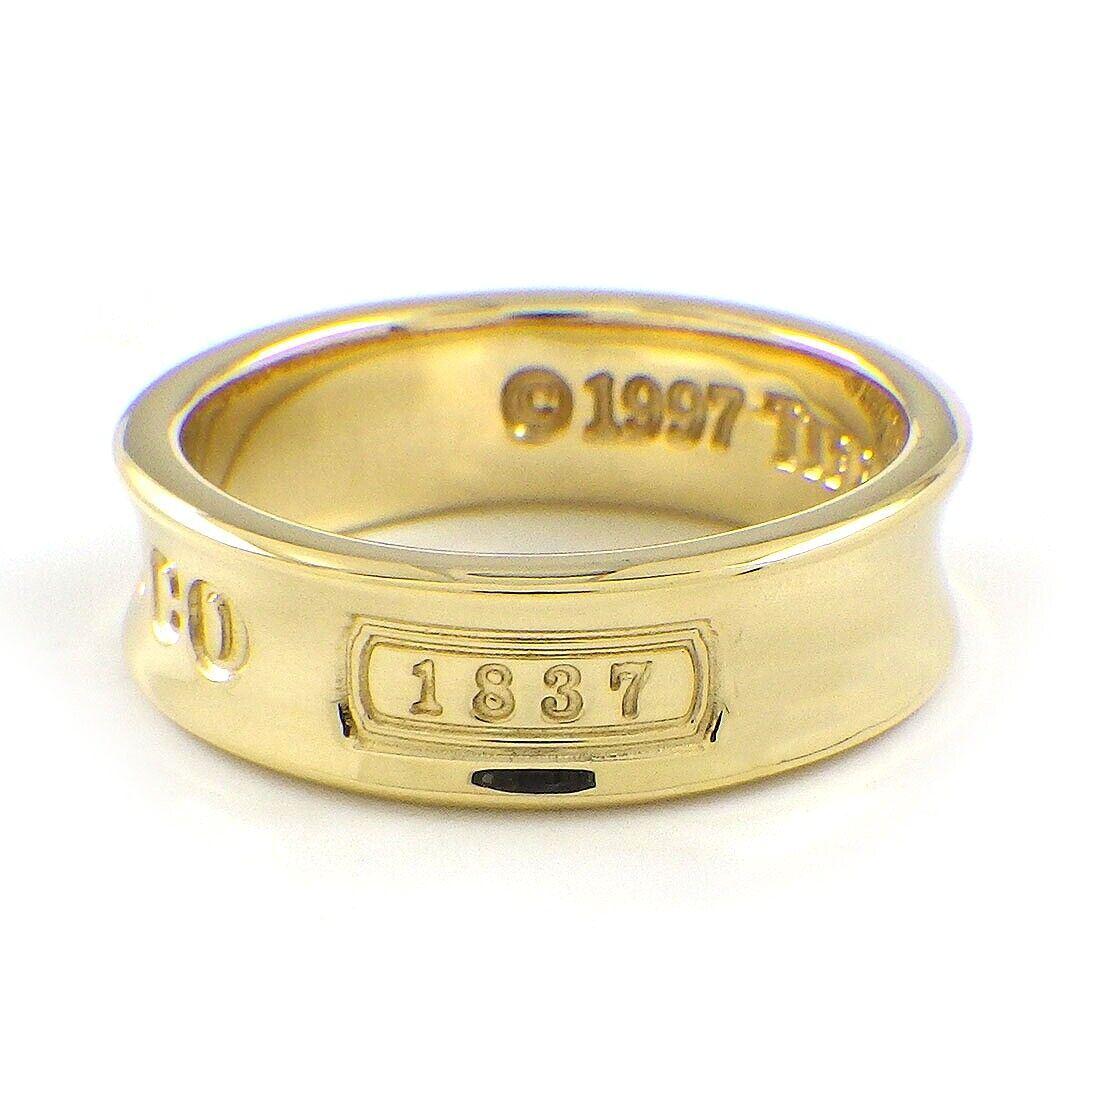 TIFFANY & Co. 1837 18K Gold 6mm Wide Ring 7 In Excellent Condition For Sale In Los Angeles, CA